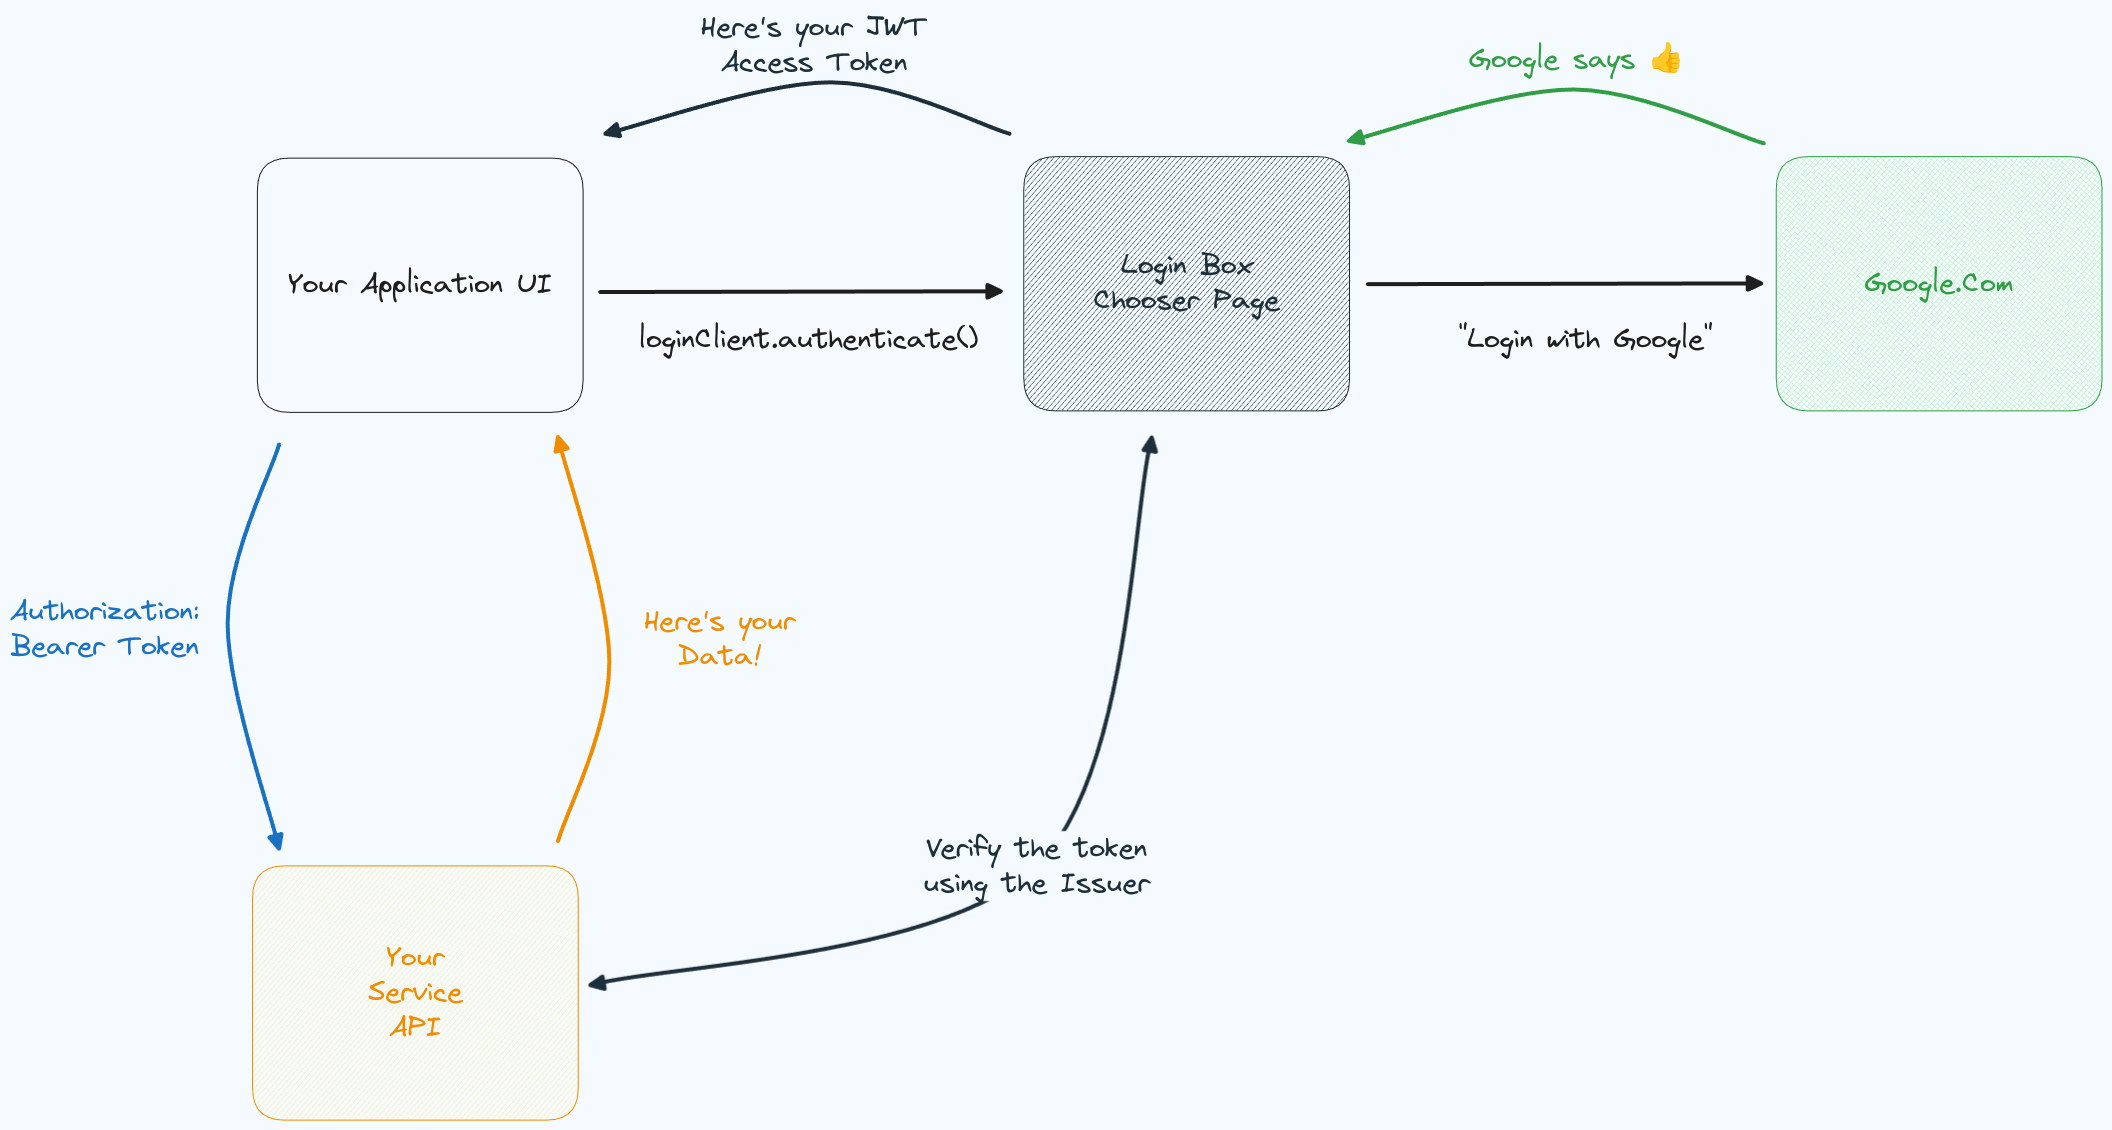 The complete authentication and login flow